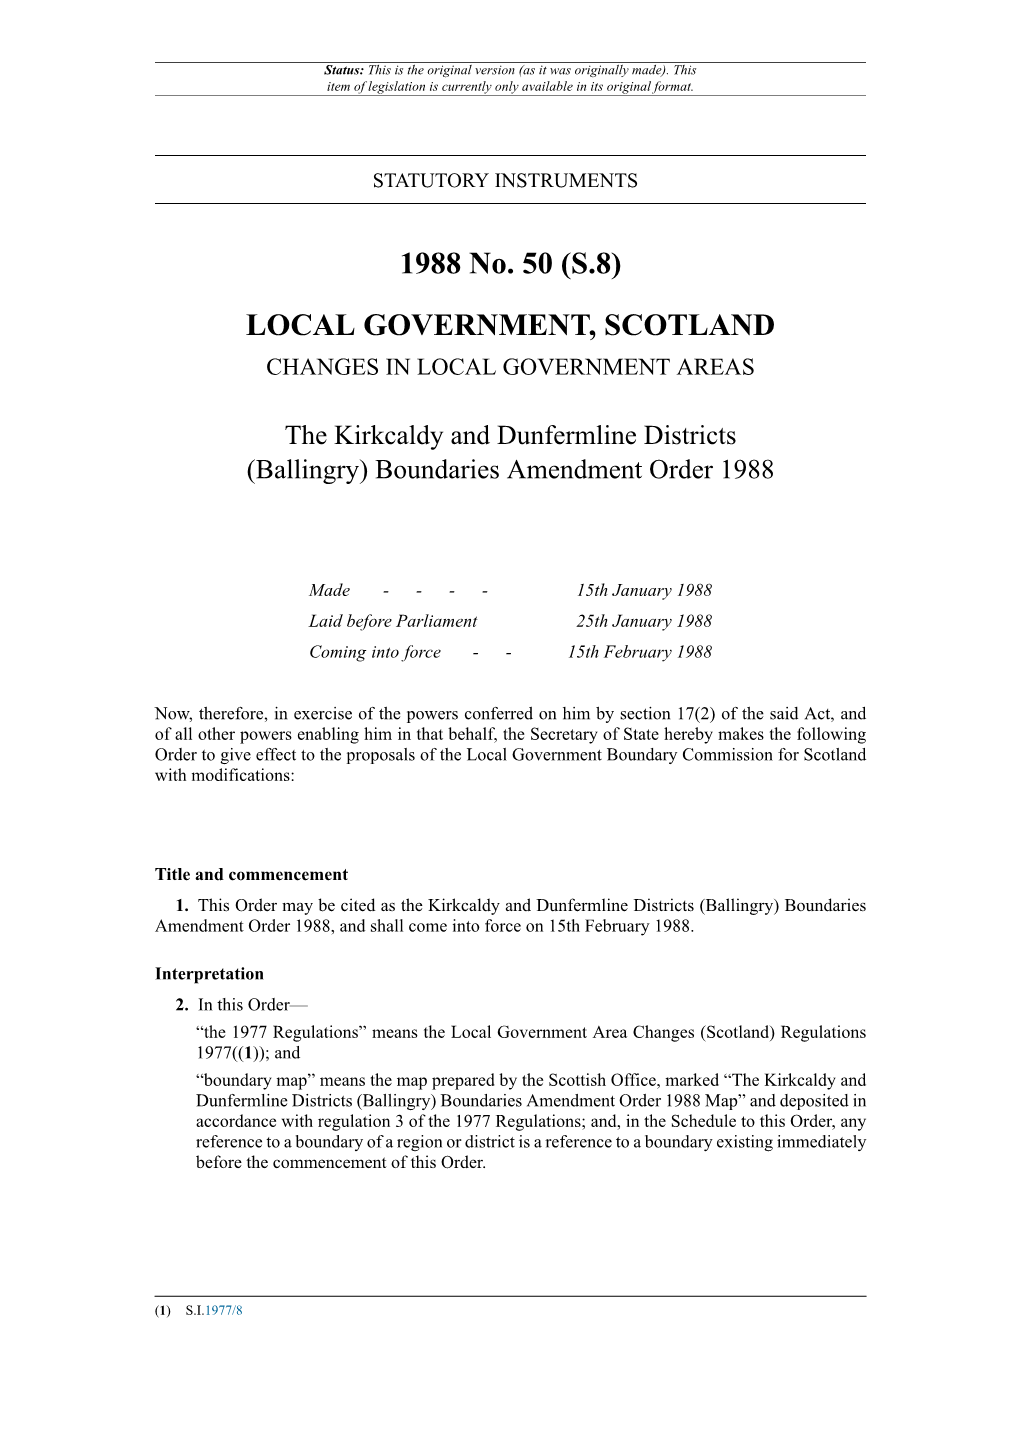 The Kirkcaldy and Dunfermline Districts (Ballingry) Boundaries Amendment Order 1988